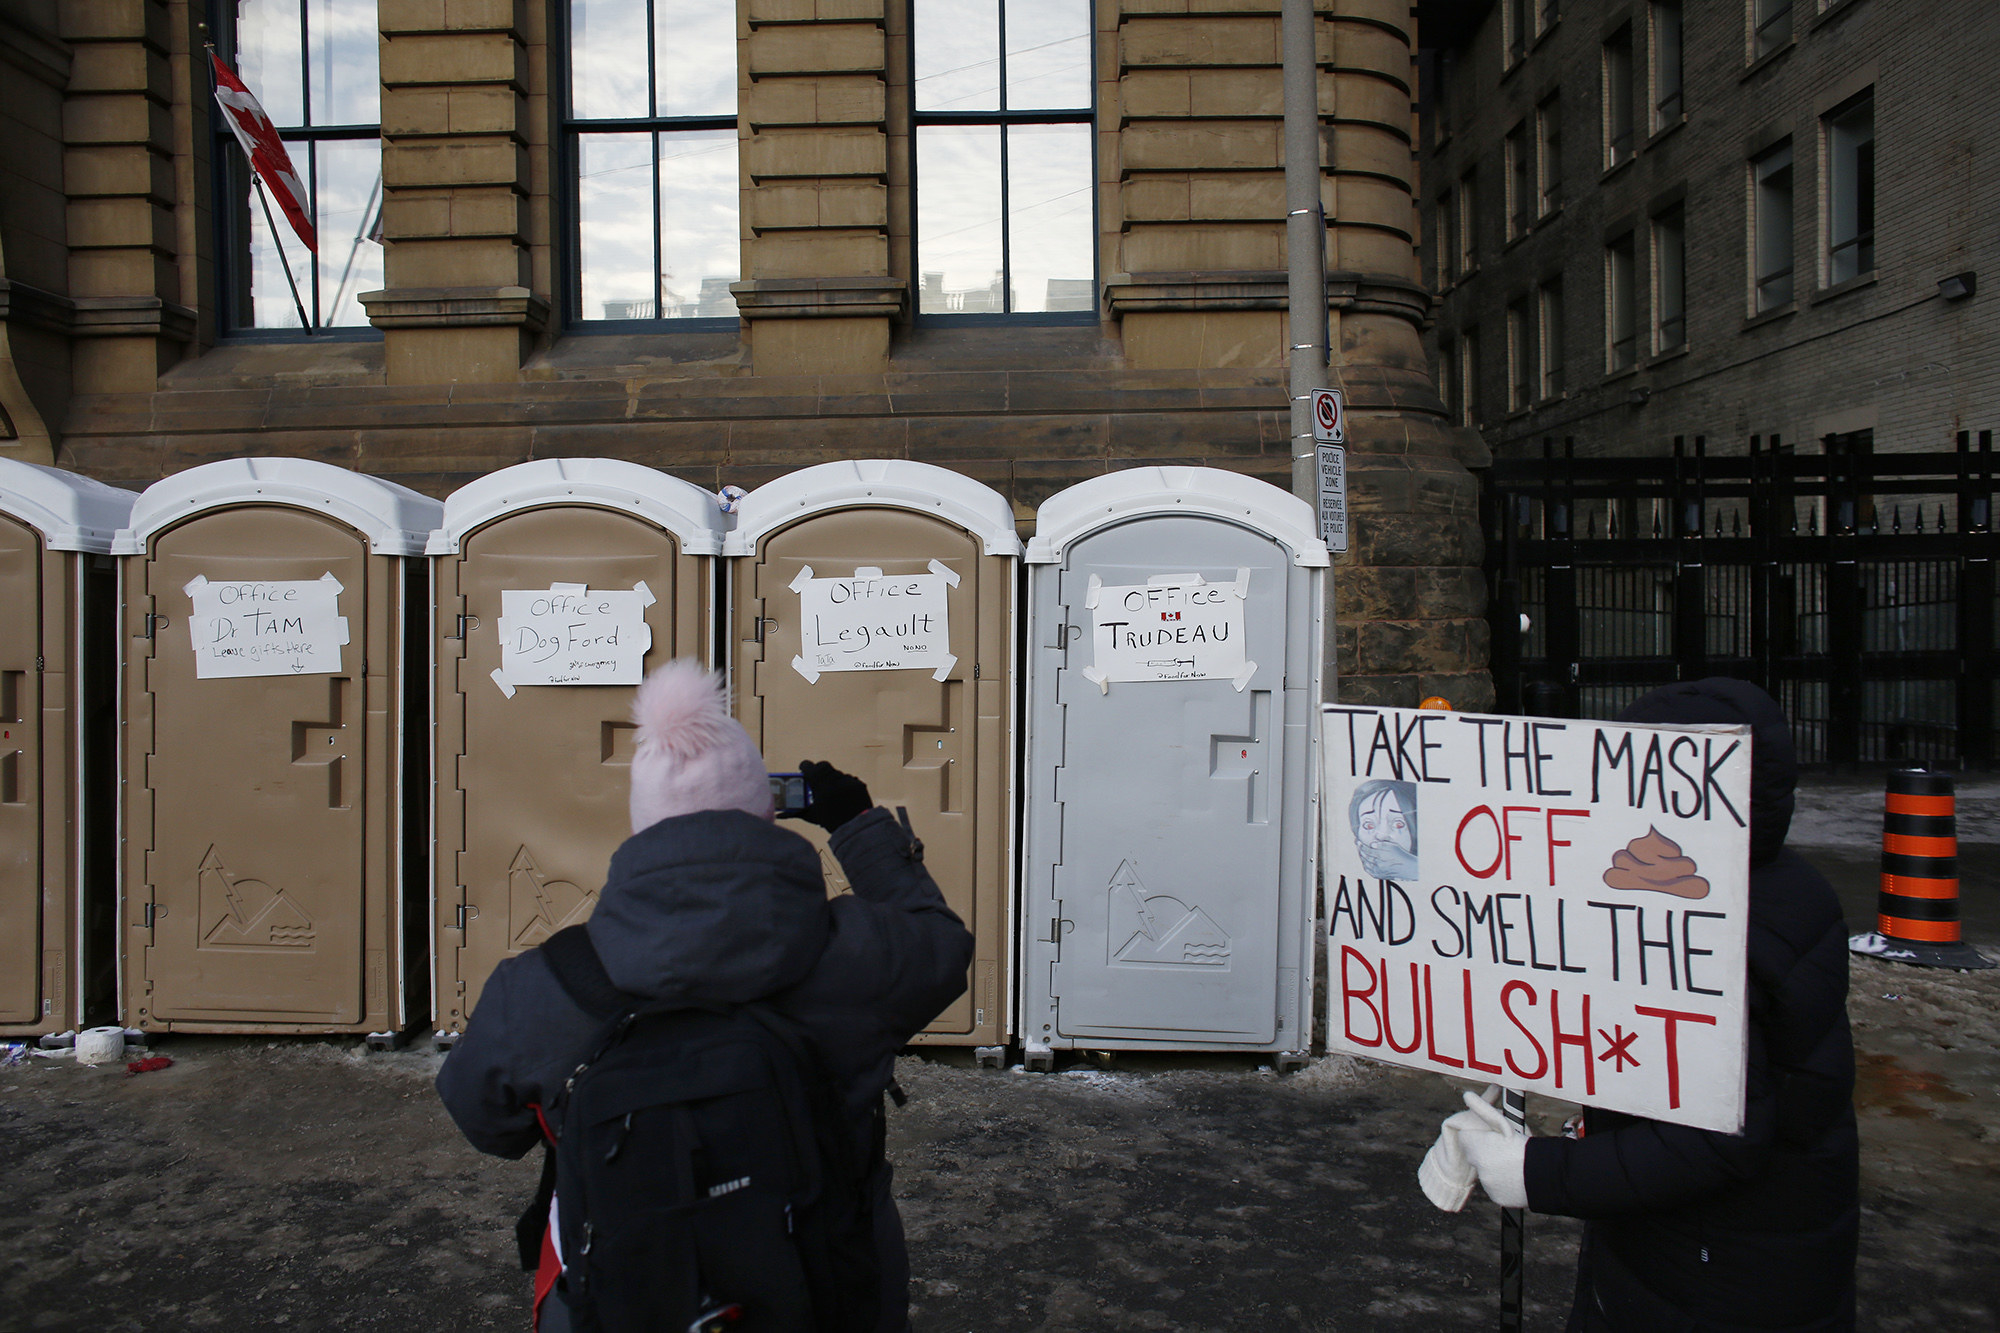 A person standing by a sign reading &quot;take the mask off and smell the bullshit&quot; takes a cellphone image of porta-potties, each with a taped-up sign denoting it as the office of a Canadian politician